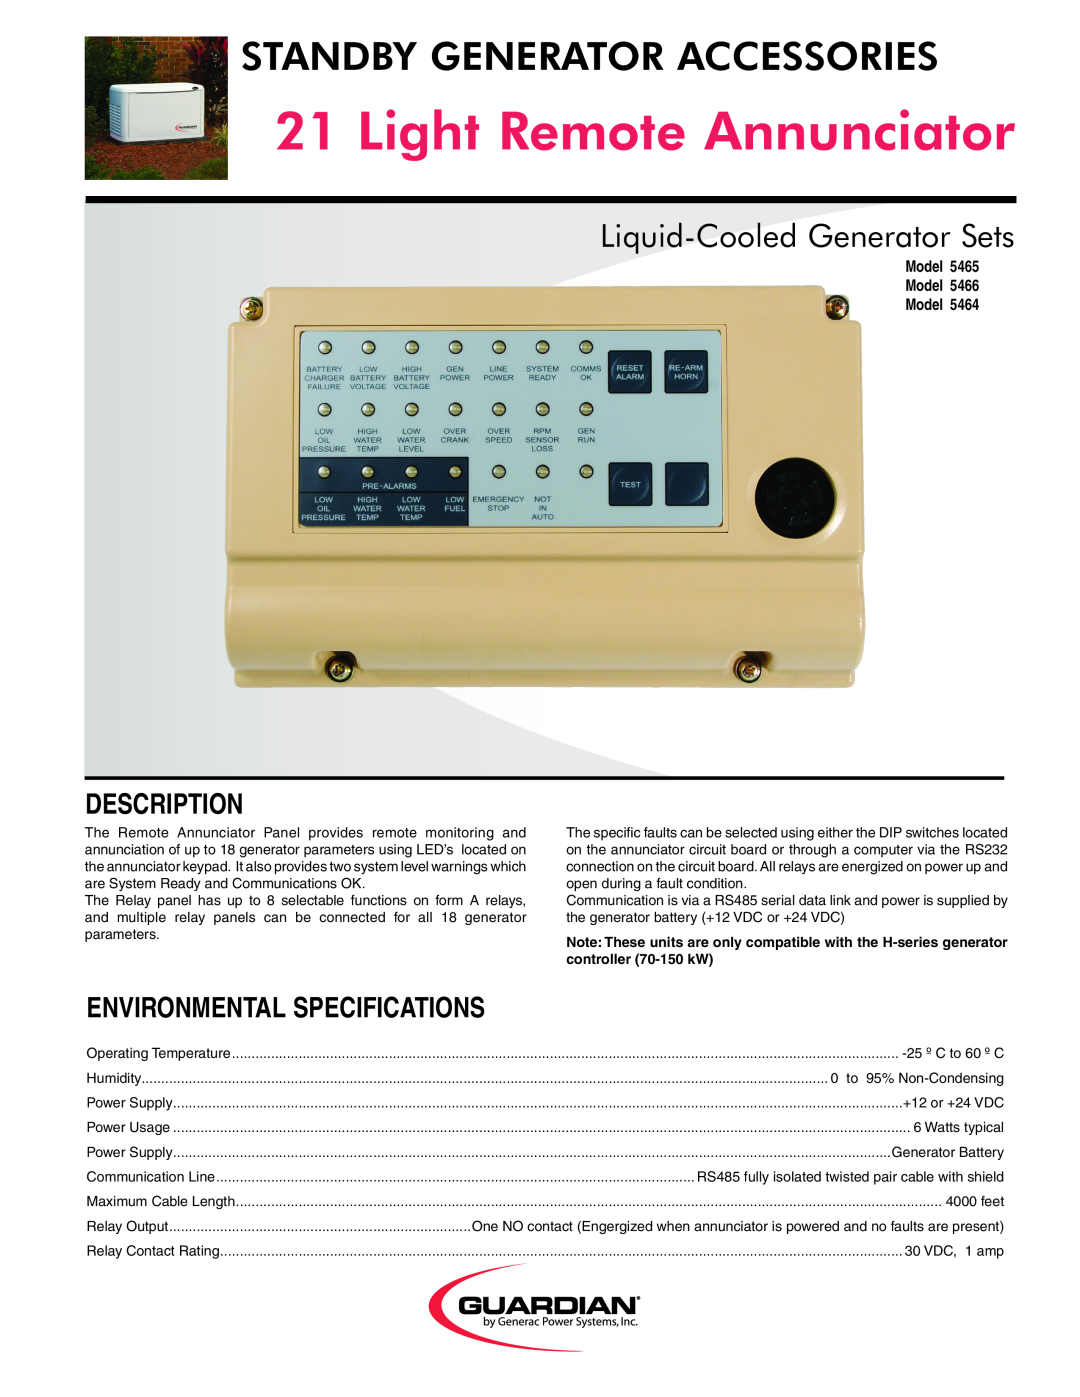 Generac Power Systems 5465, 5464, 5466 specifications Light Remote Annunciator, Standby Generator Accessories, Description 